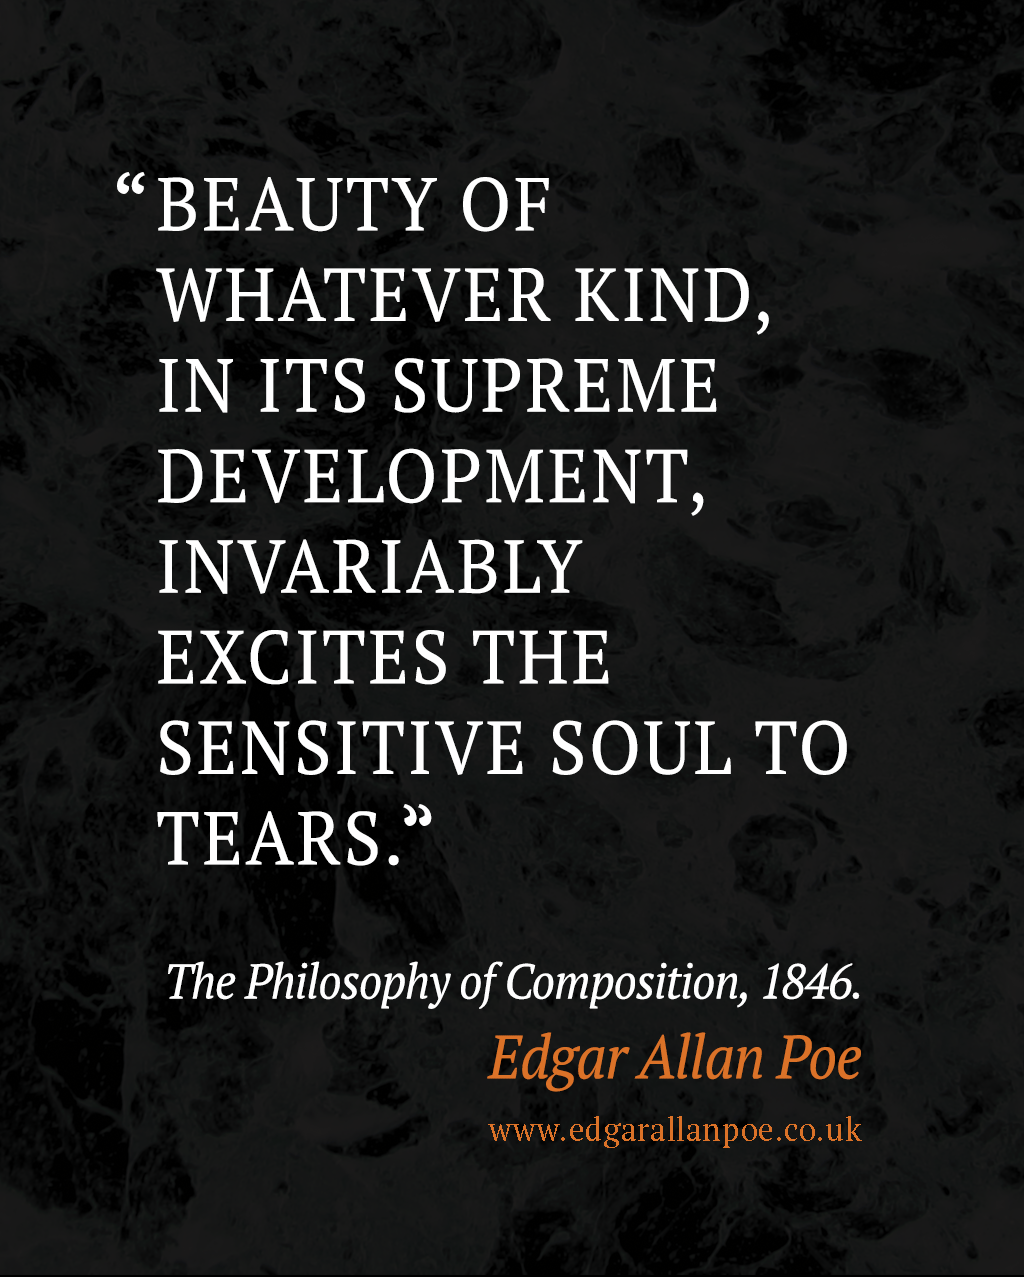 Beauty of whatever kind - Edgar Allan Poe Quote